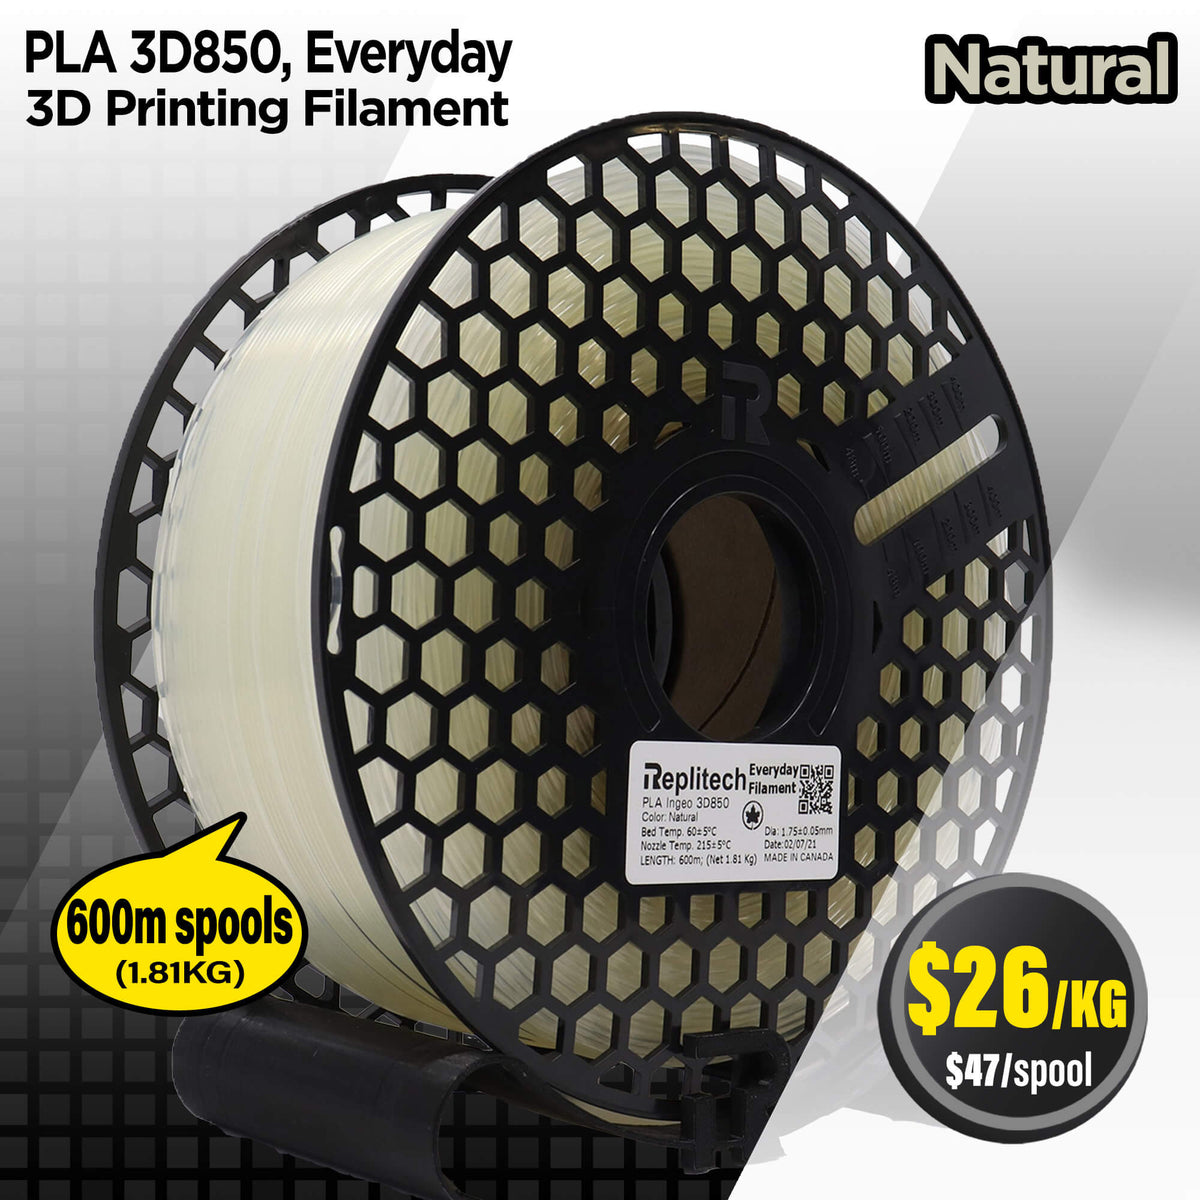 PLA 3D850 Everyday Natural